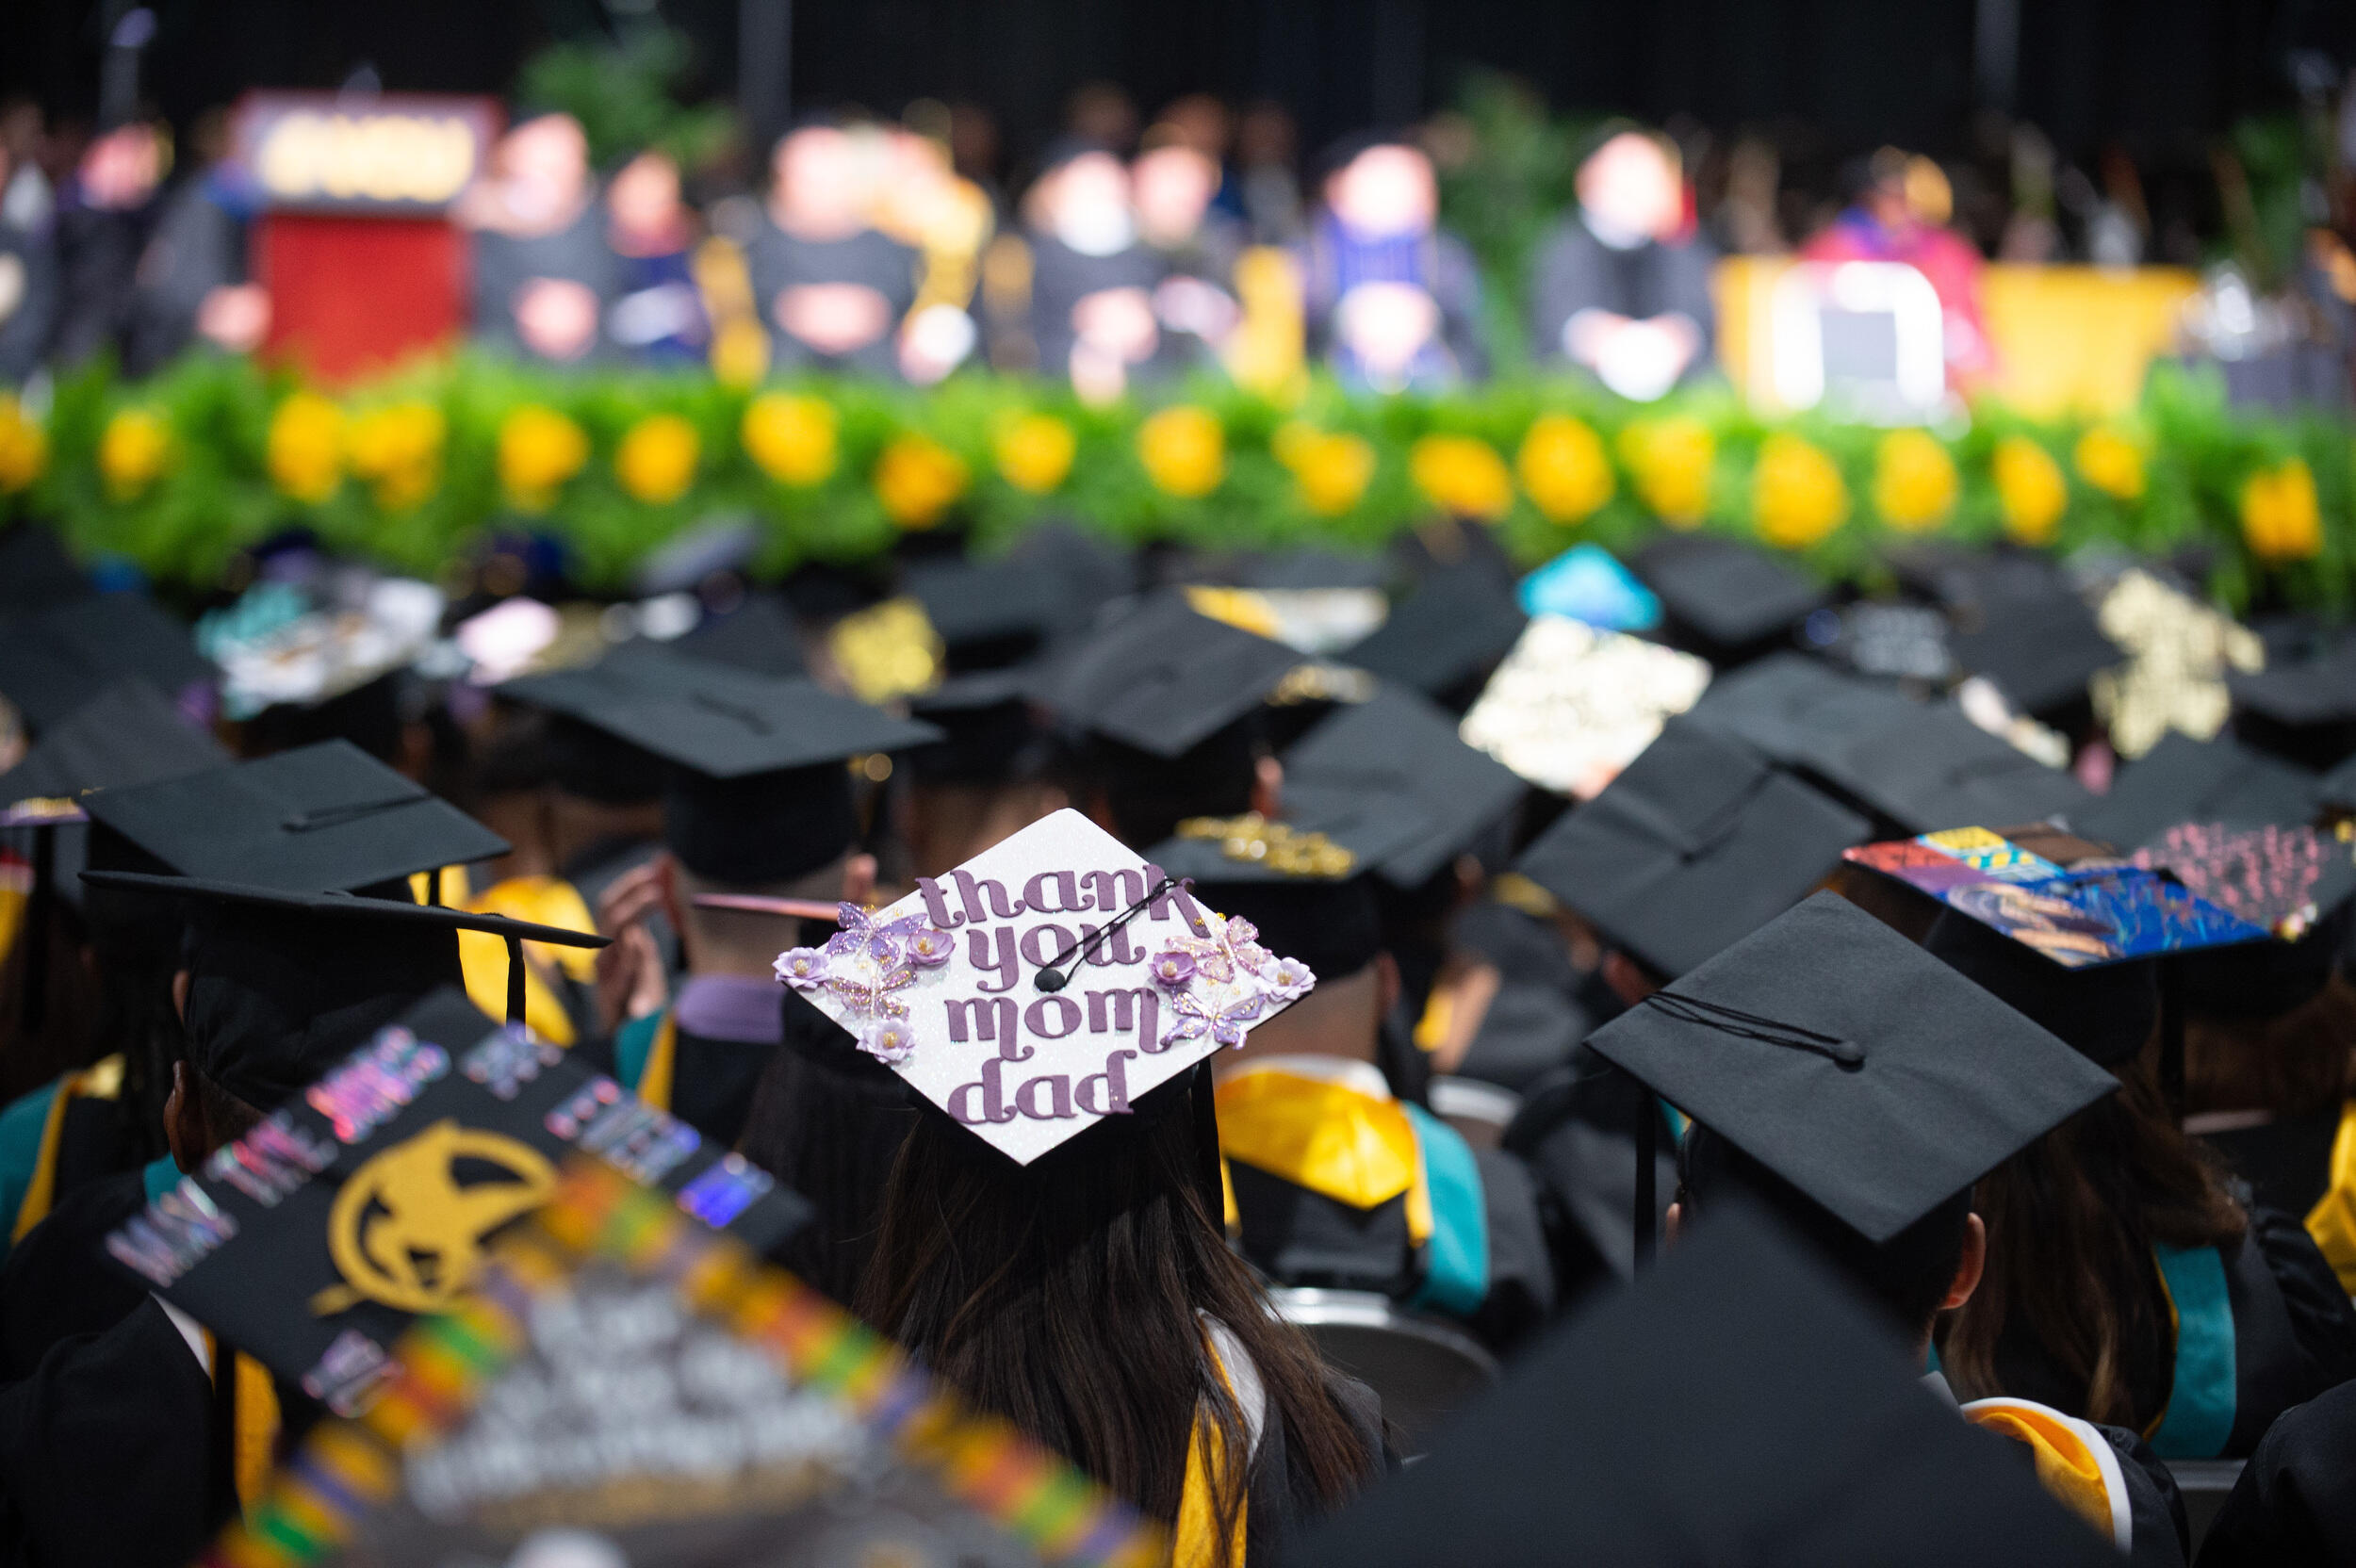 Students wearing graduation caps attend a graduation ceremony. A cap in the foreground says \"thank you mom dad.\"